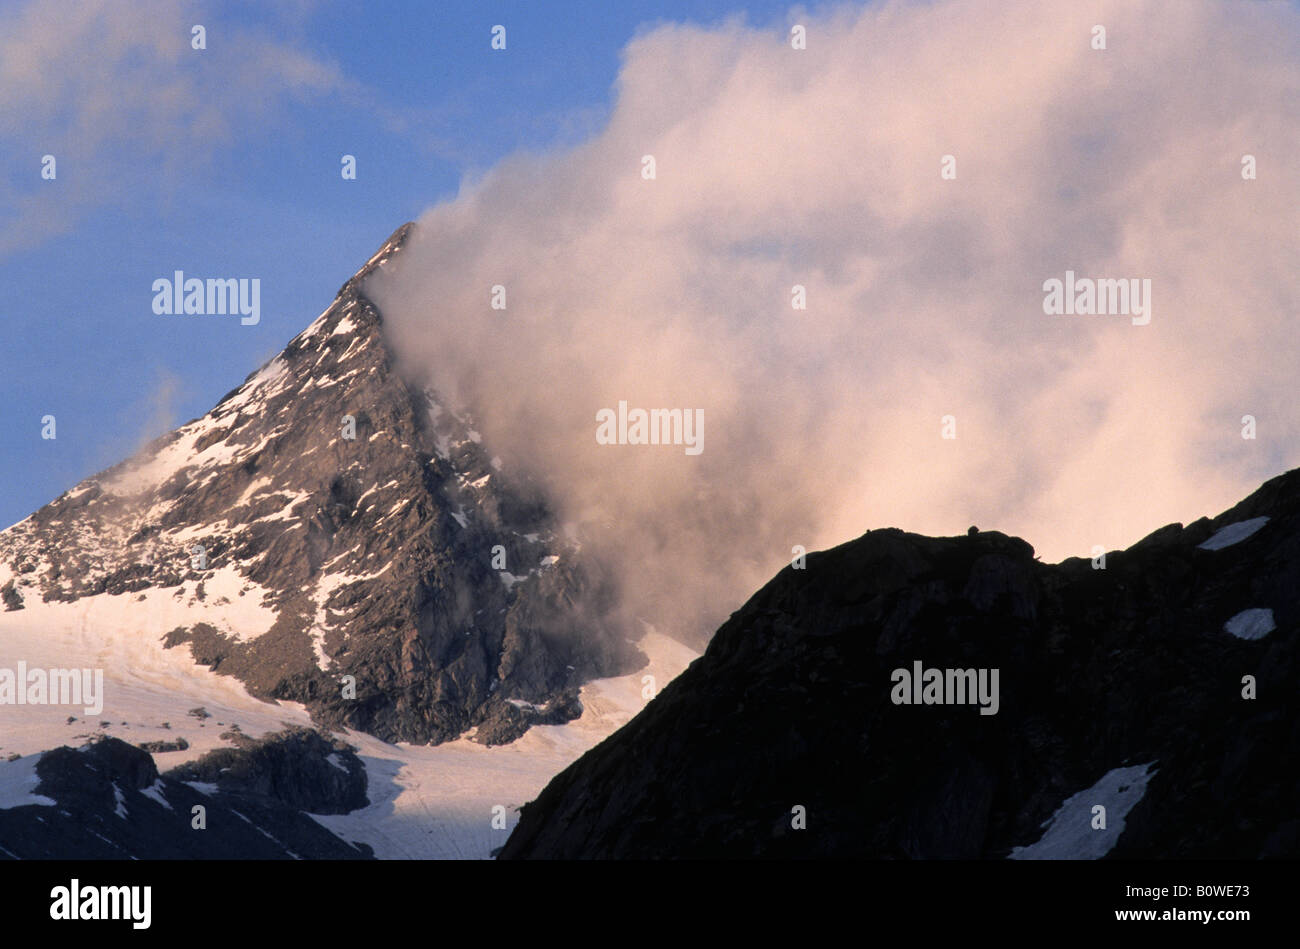 Shreds of cloud above a mountain in the evening light, Zillertal Alps, Tyrol, Austria, Europe Stock Photo